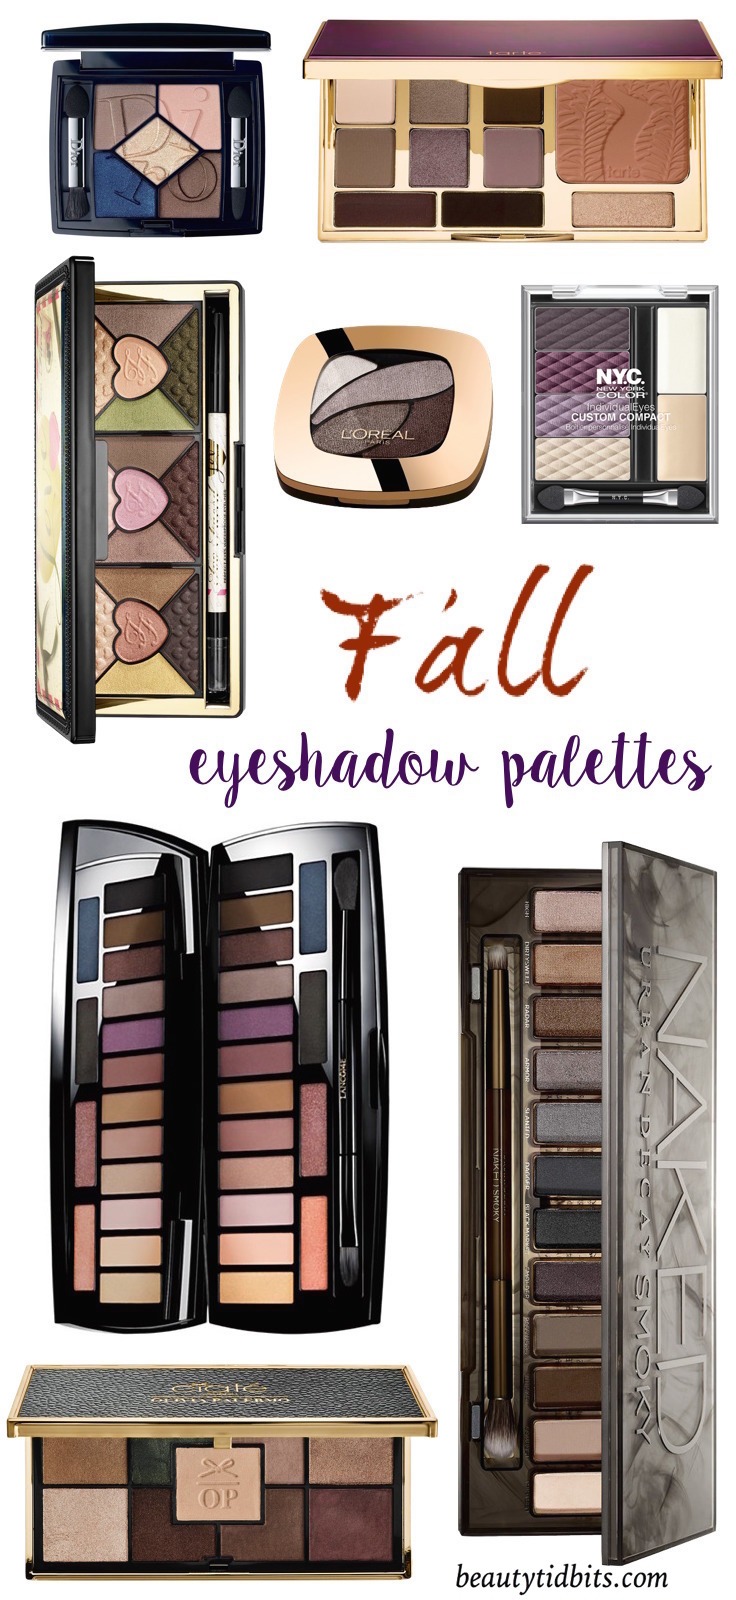 Whatever your mood, here are 10 eyeshadow palettes perfect for fall!